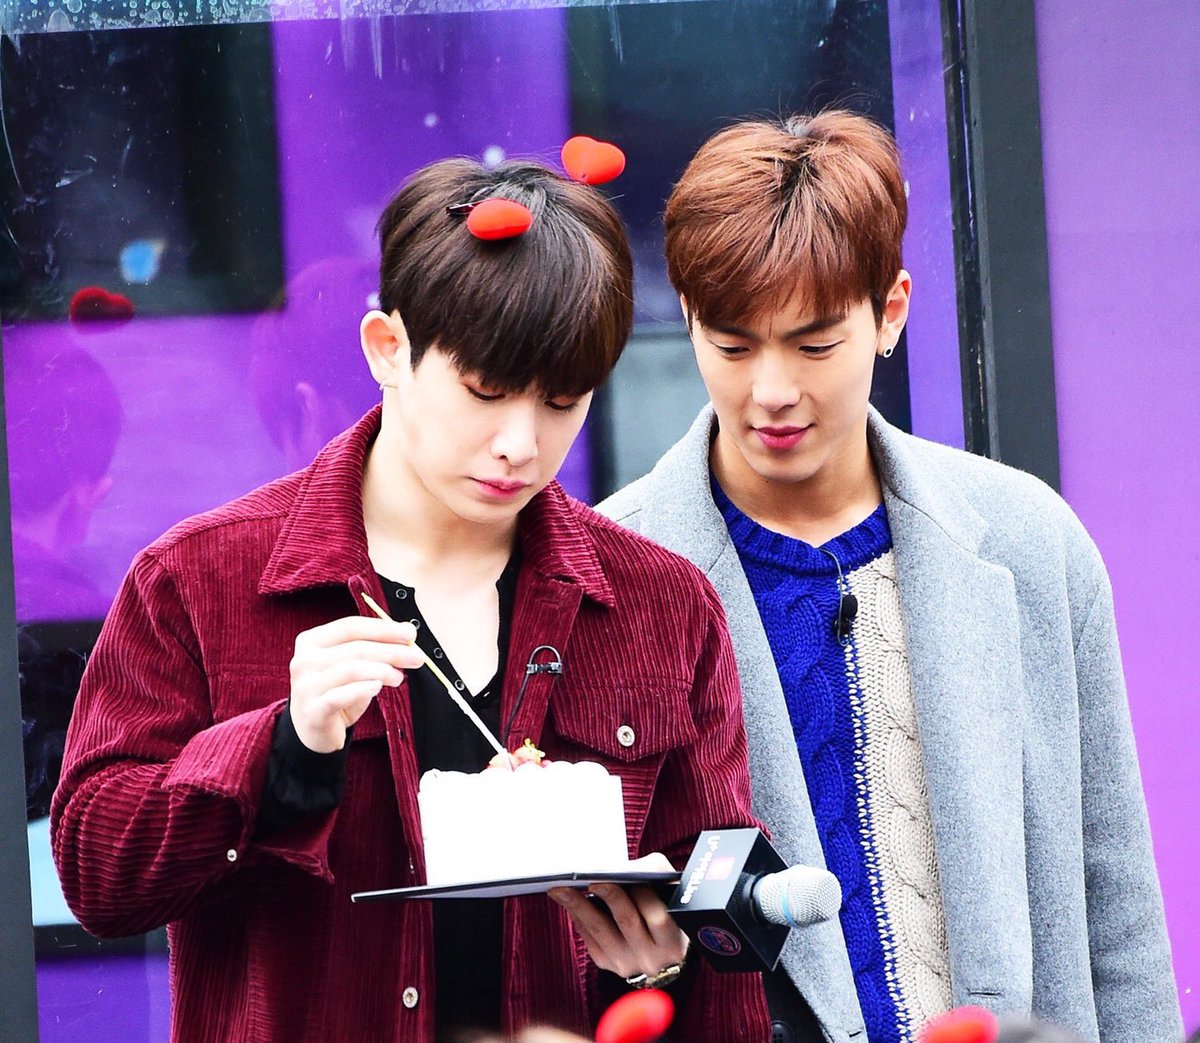 22. Shownu always stares so intensely at food it’s a mix of both desire and stress bc he really wants it but what if he doesn’t get any 